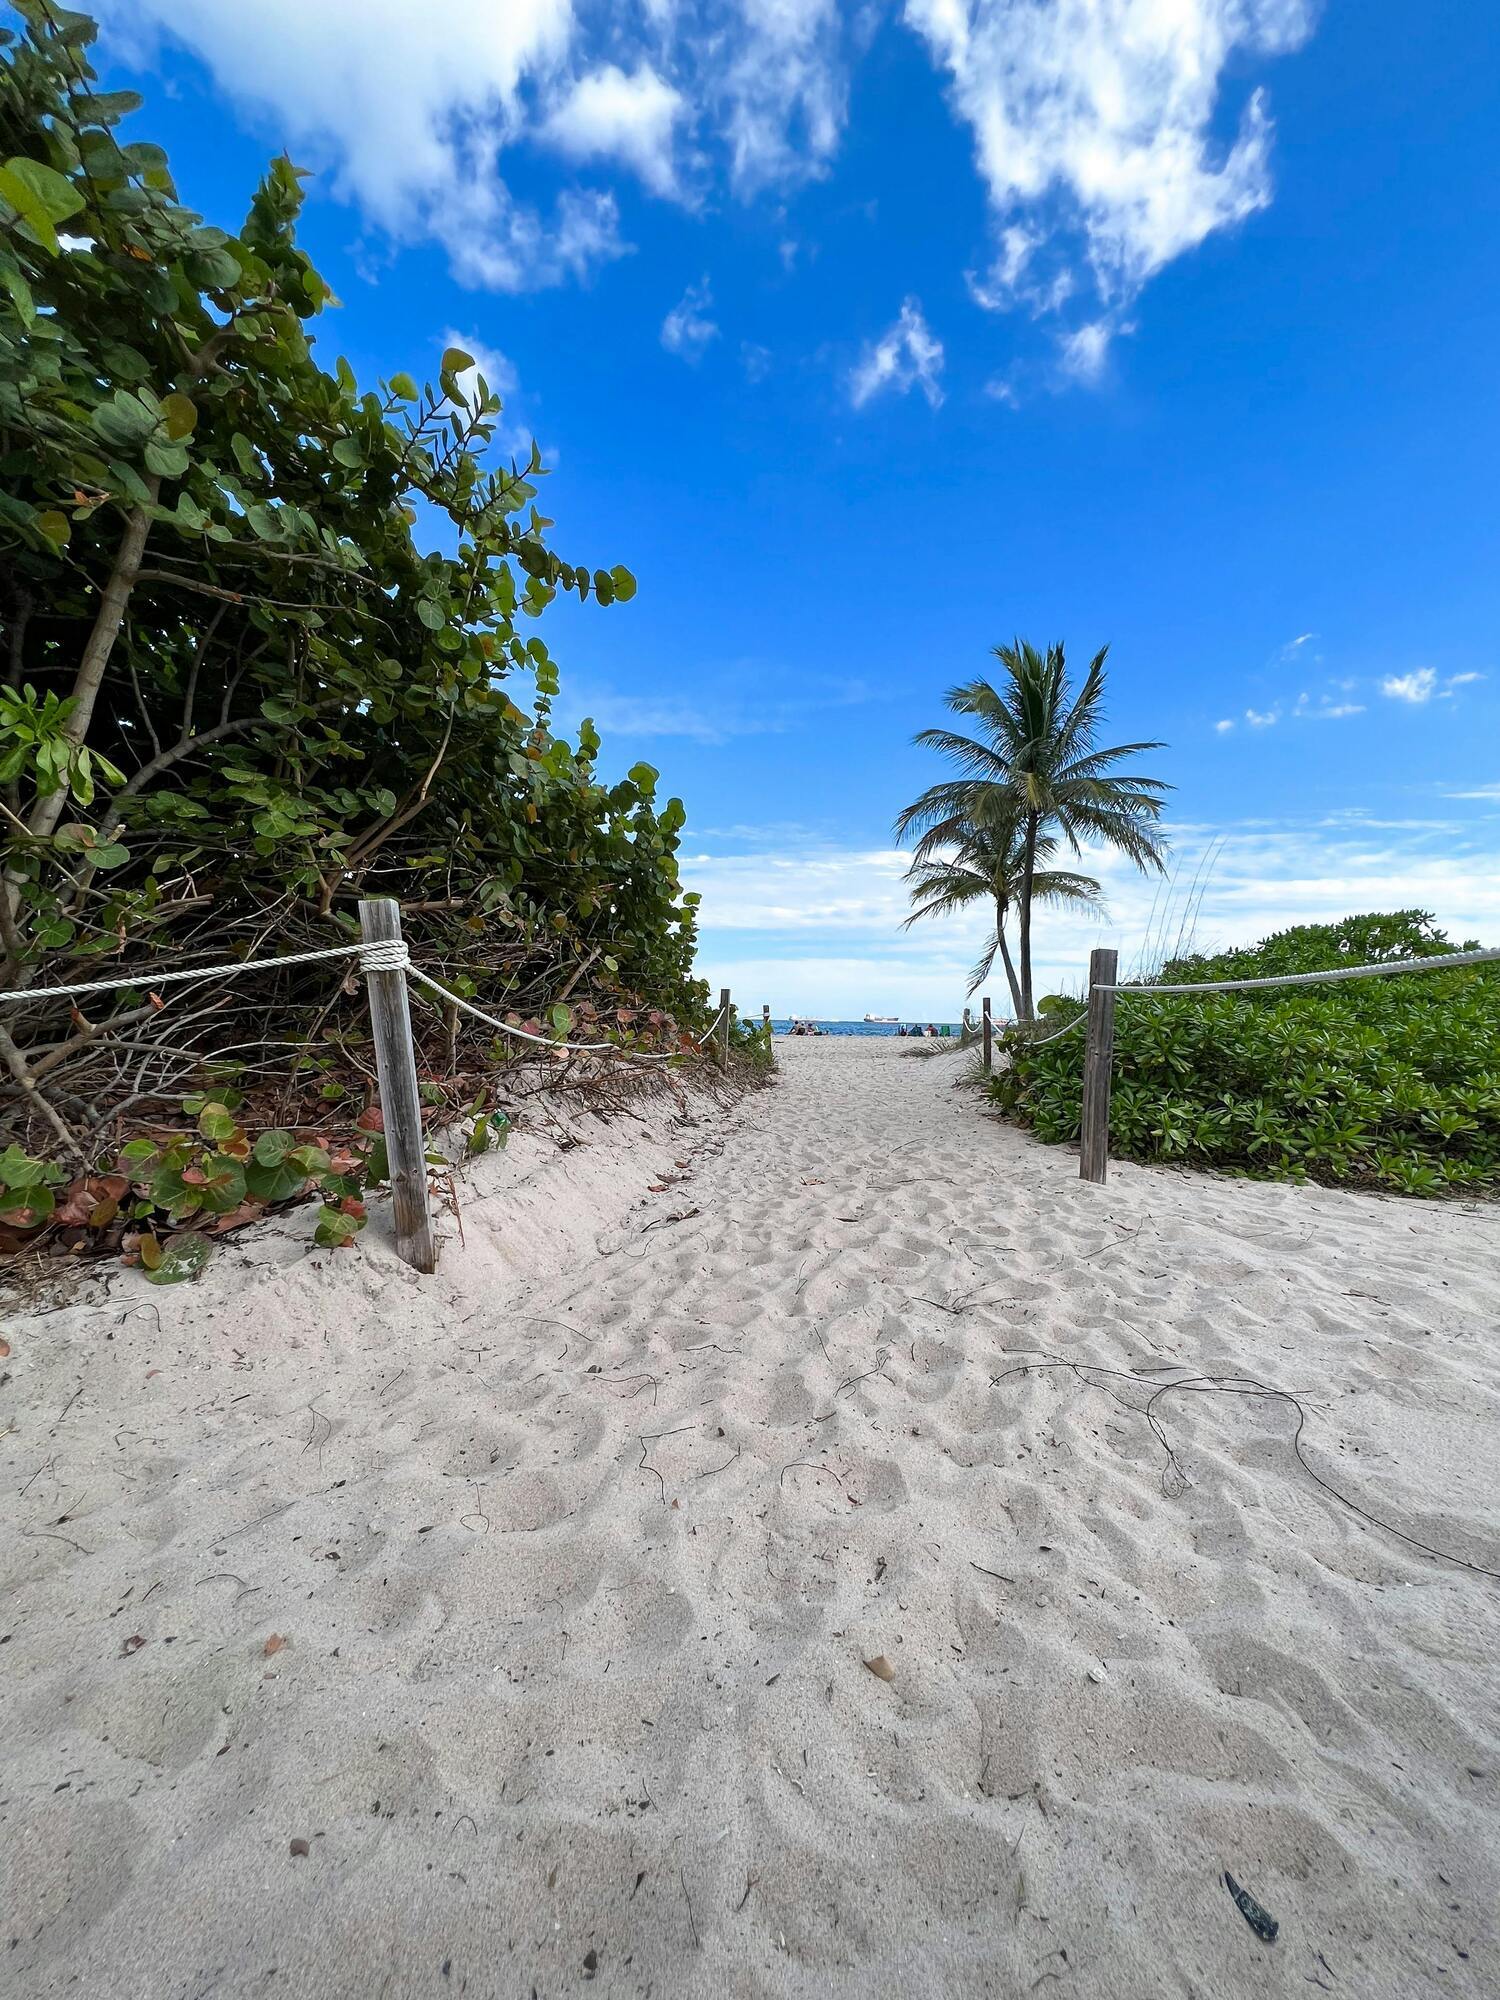 Best Florida beaches for relaxing on calm waters, wave surfing and trails for scenery walks